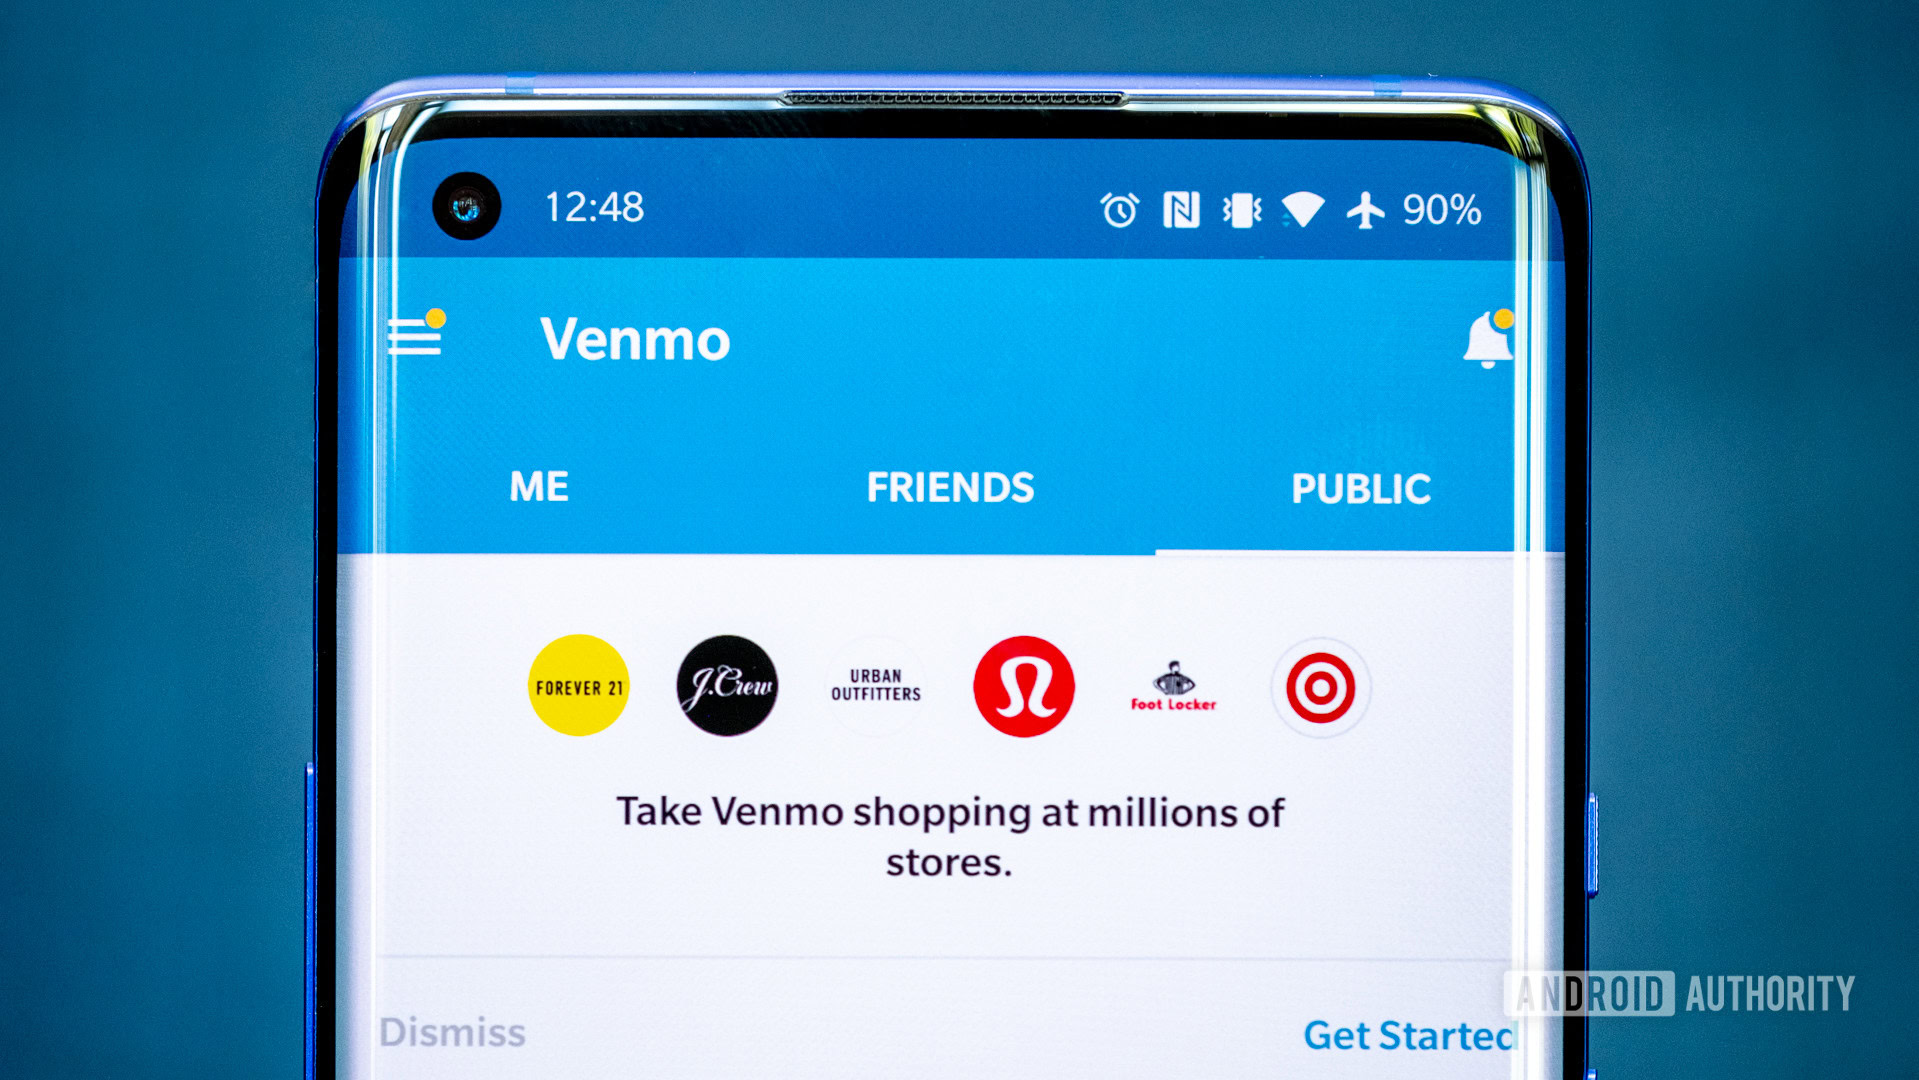 how-to-add-money-to-your-venmo-account-android-authority